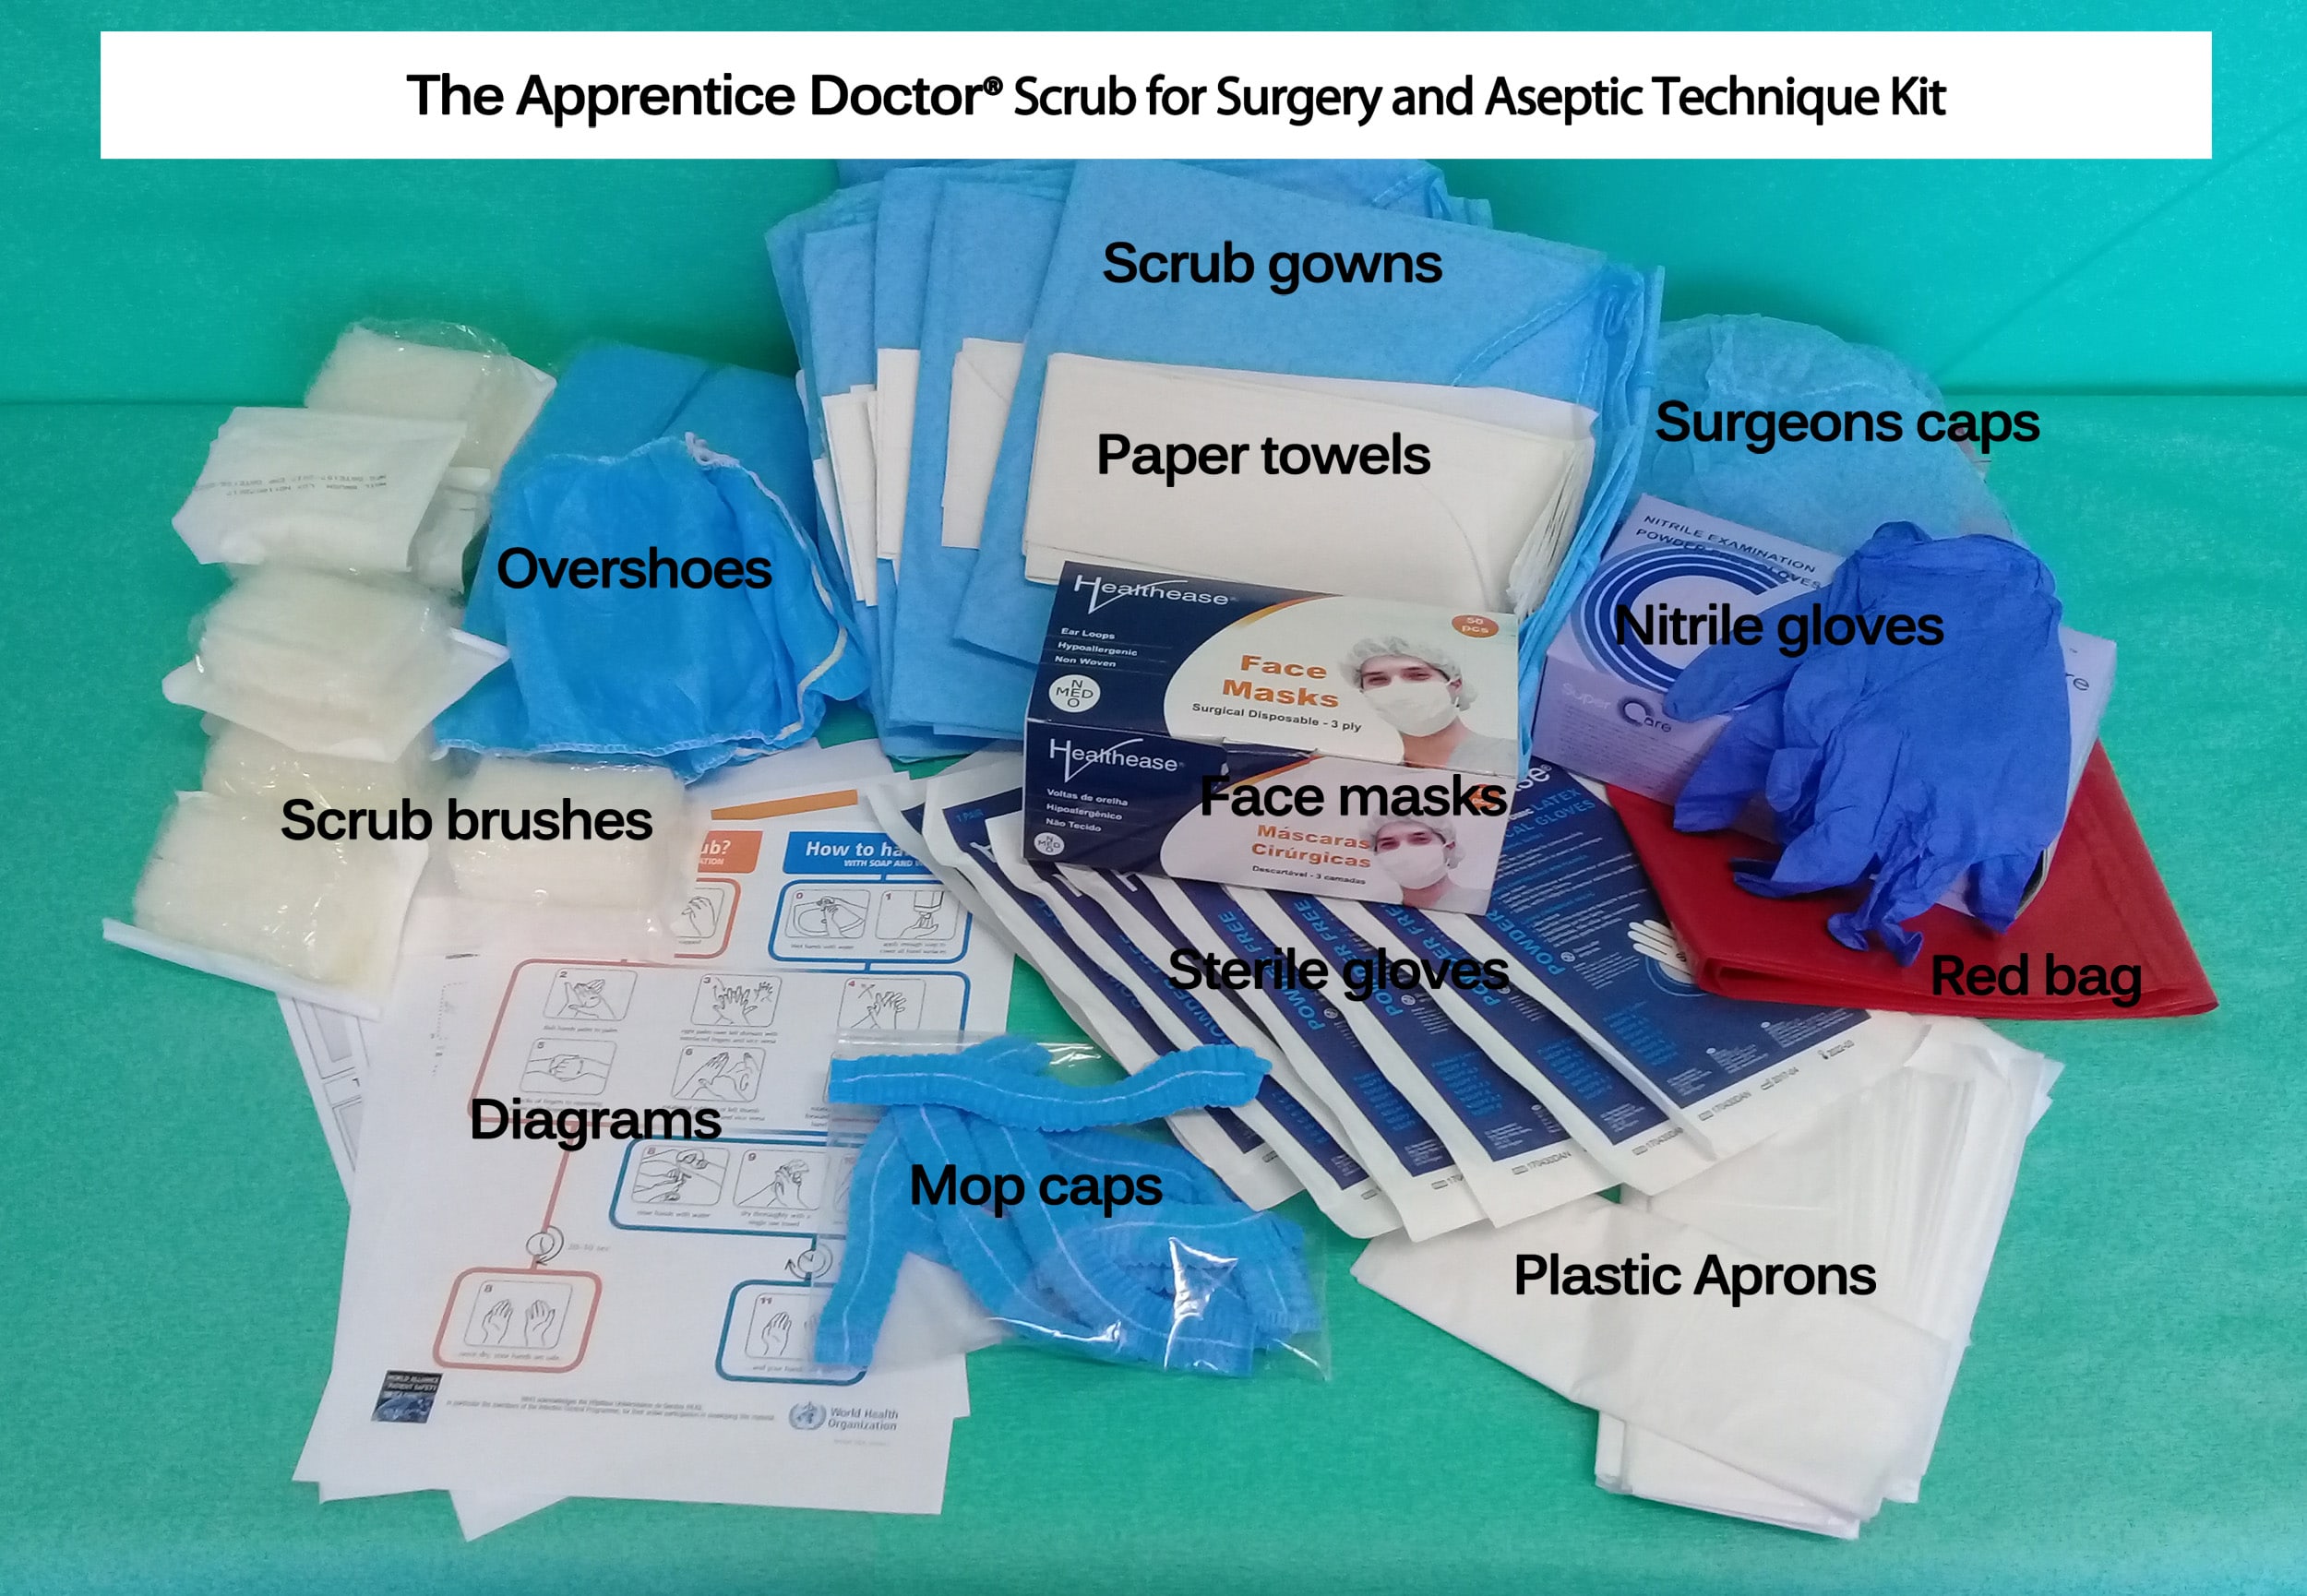 Attain More Than 200 Medical/Surgical Skills Hours: Medicine and Healthcare Careers